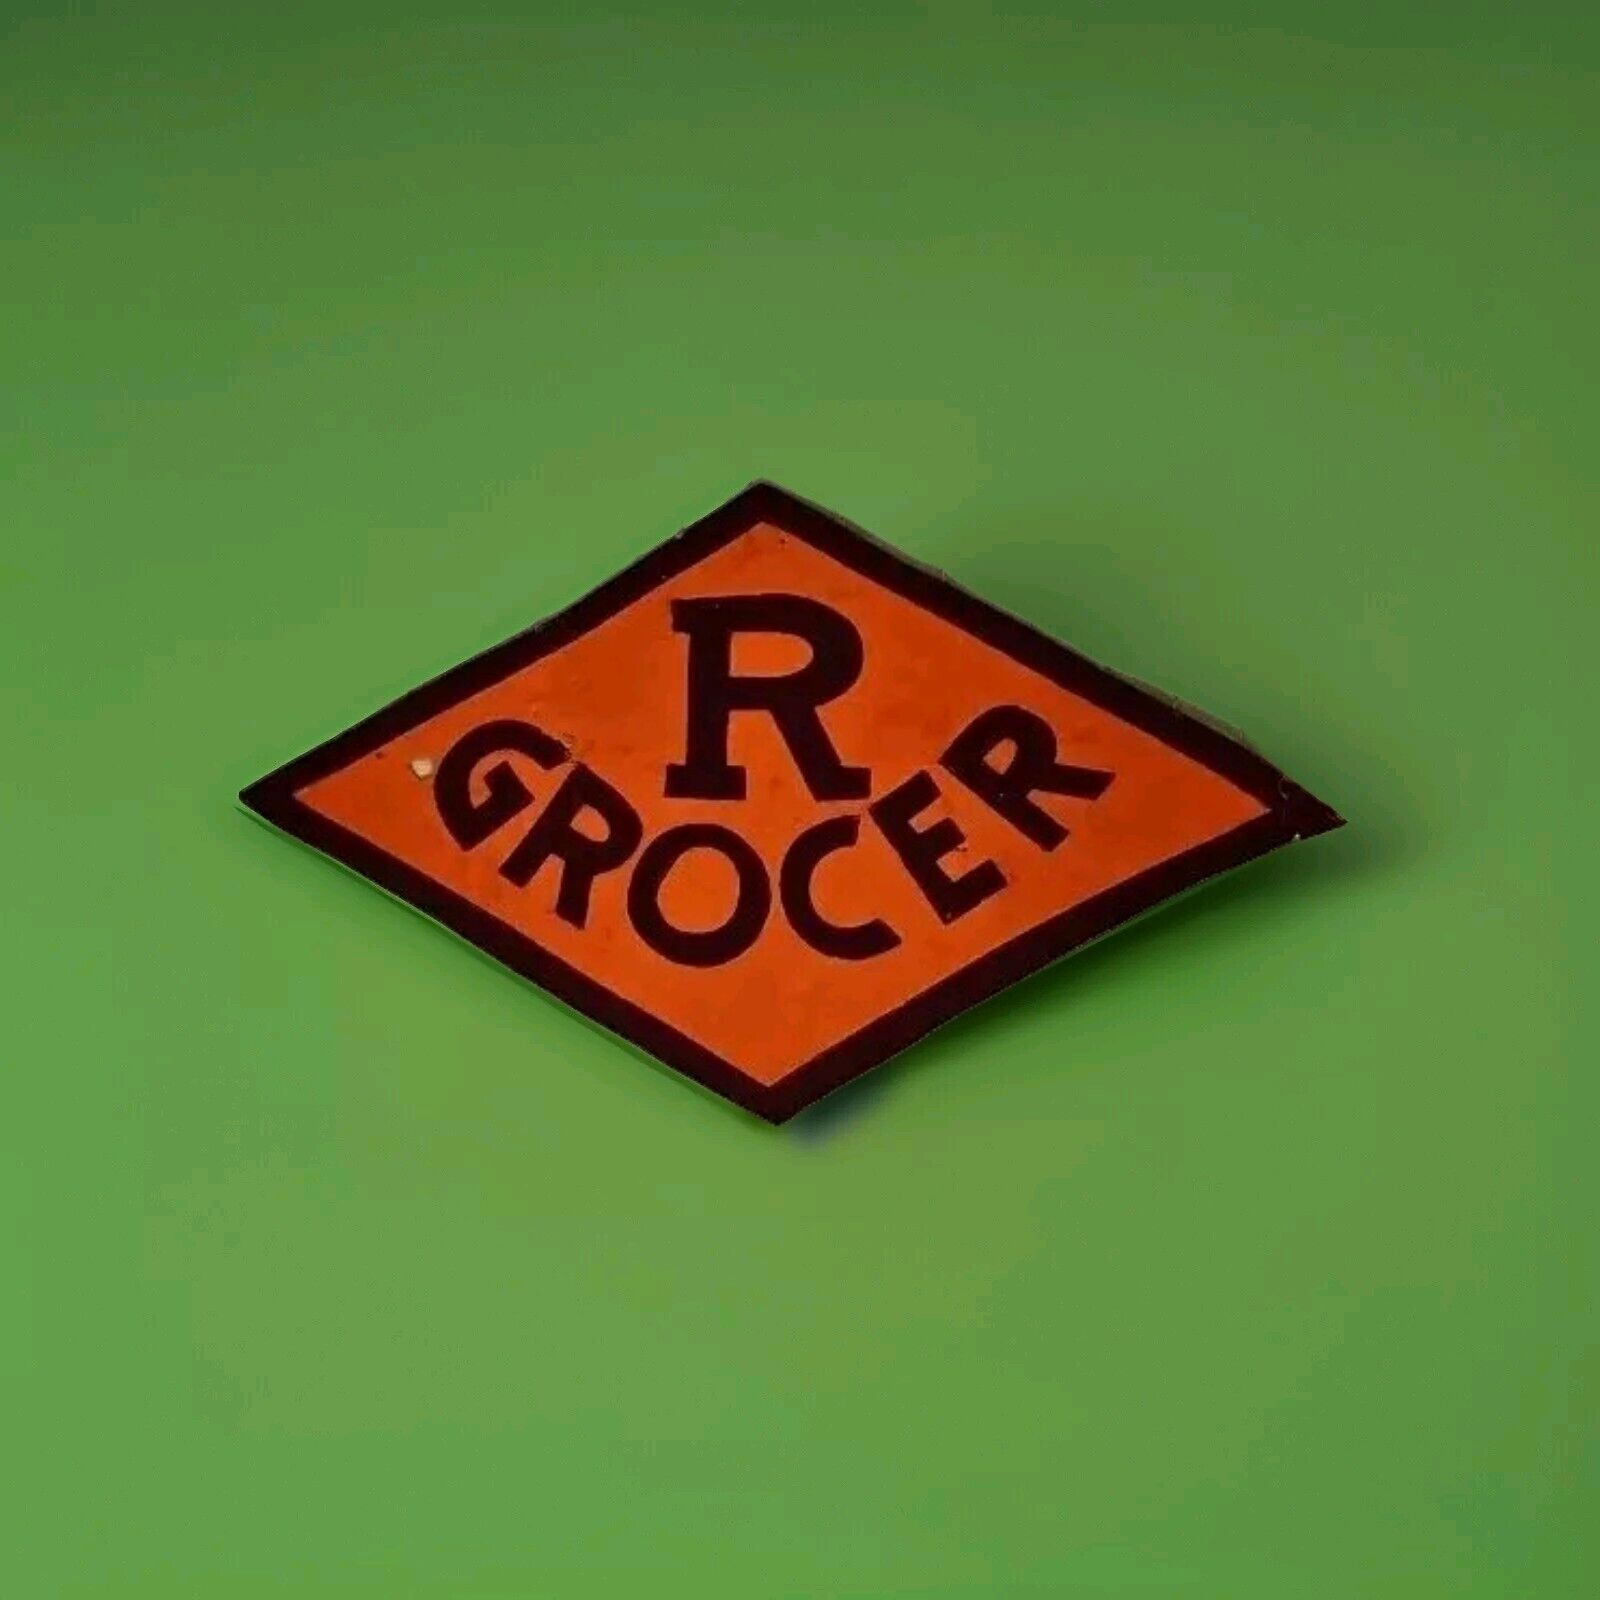 R GROCER Patch 15